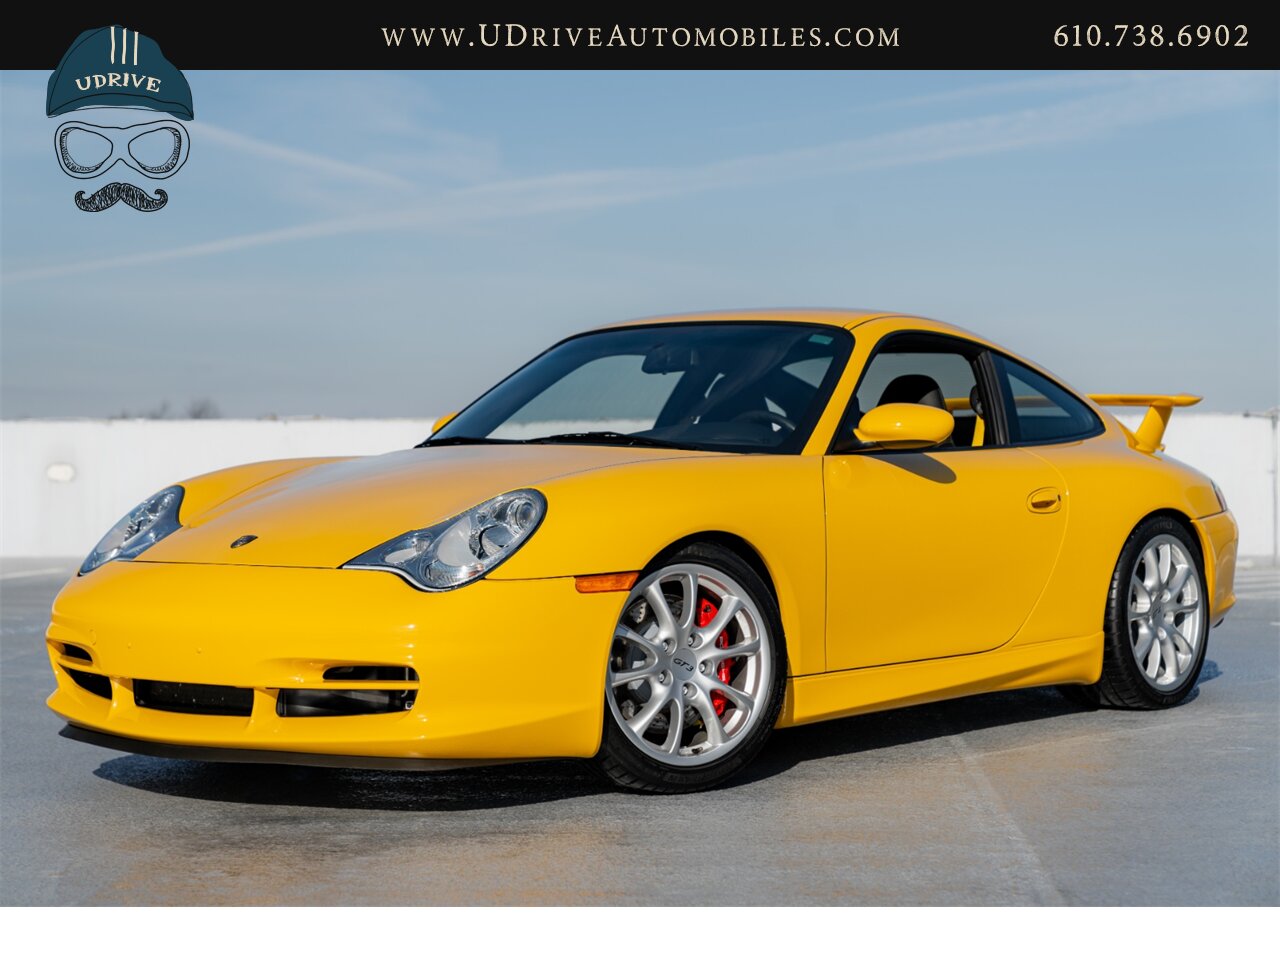 2005 Porsche 911 GT3 996 Speed Yellow Sport Seats Pntd Hardbacks  Pntd Console Deviating Stitch Yellow Accents Throughout - Photo 1 - West Chester, PA 19382